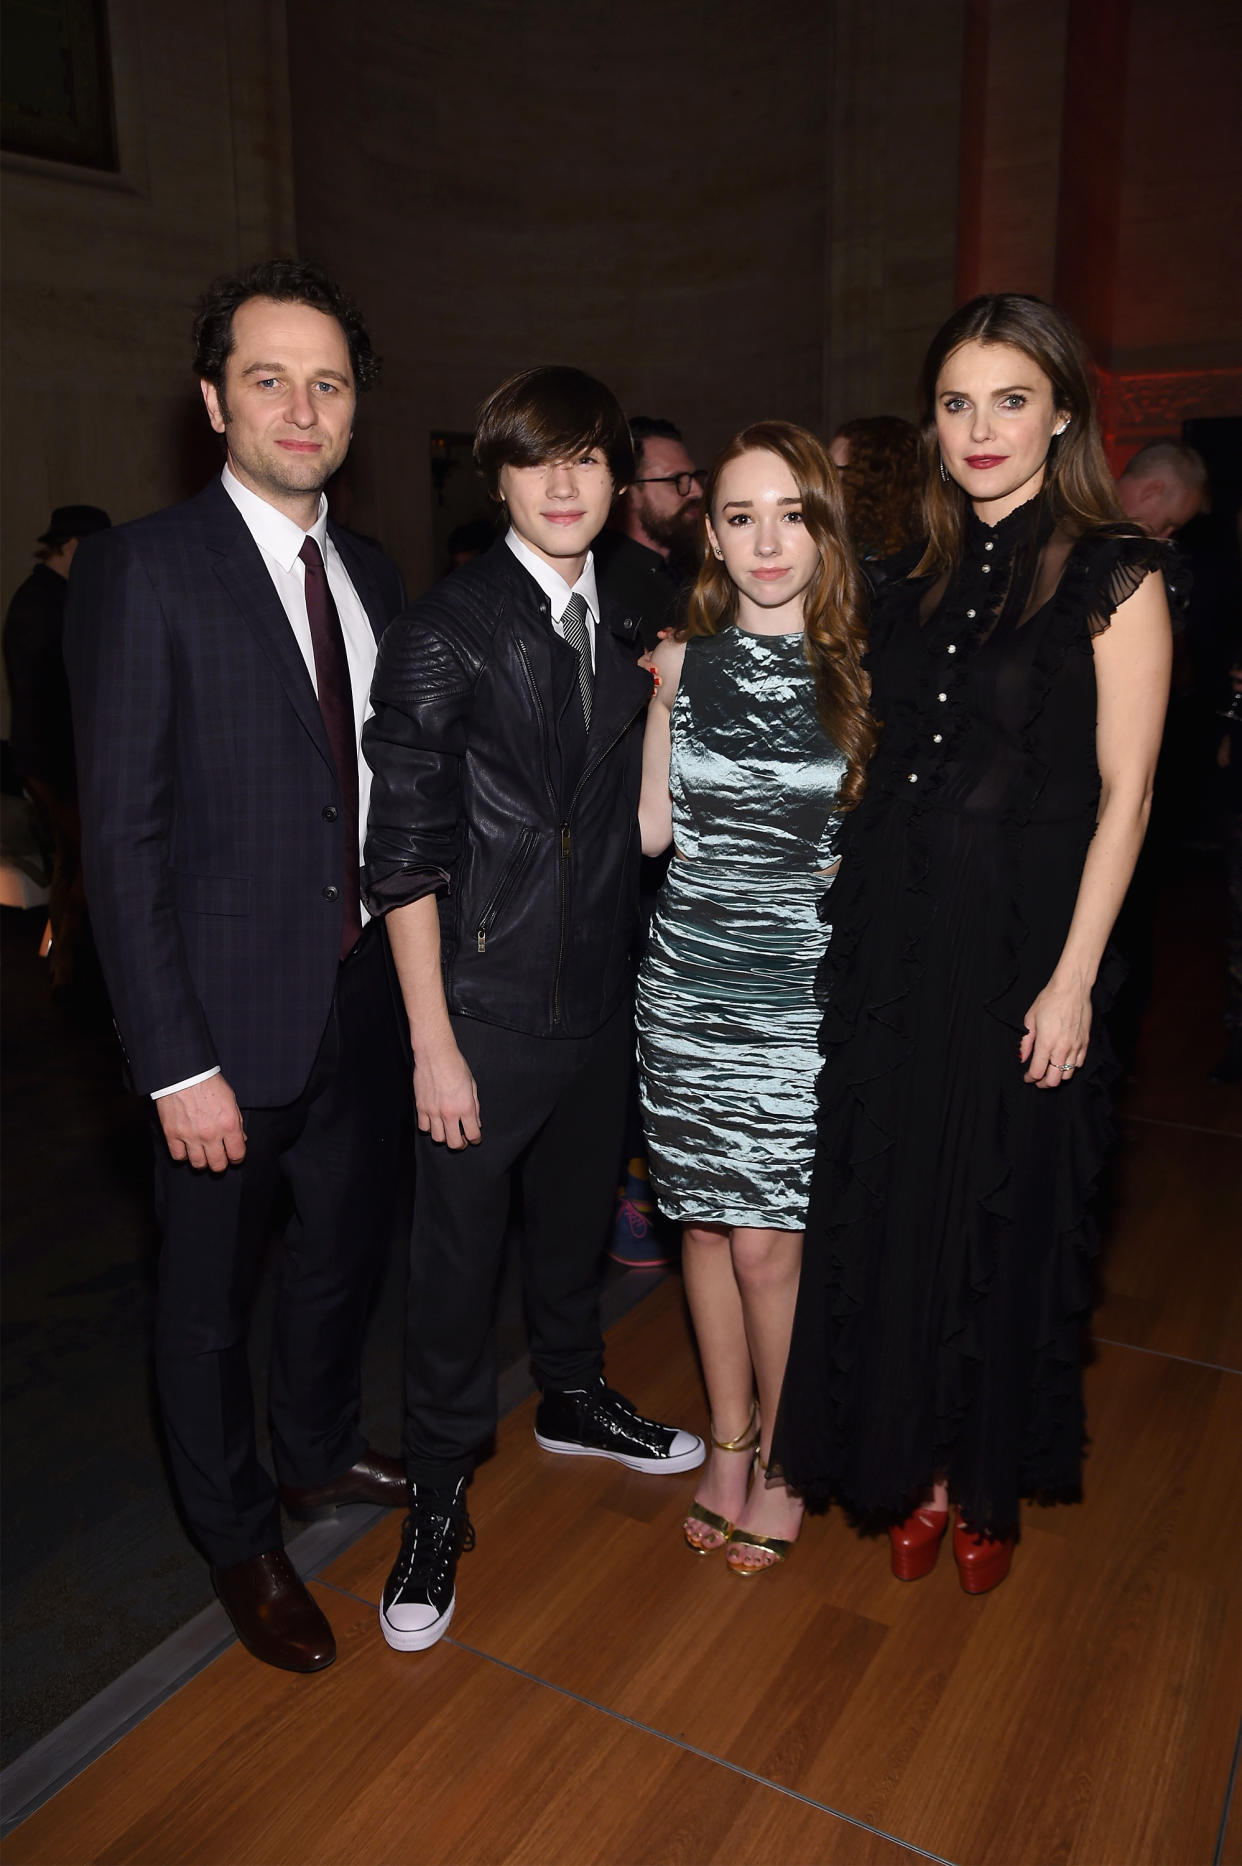 "The Americans" Season 4 Premiere - After Party